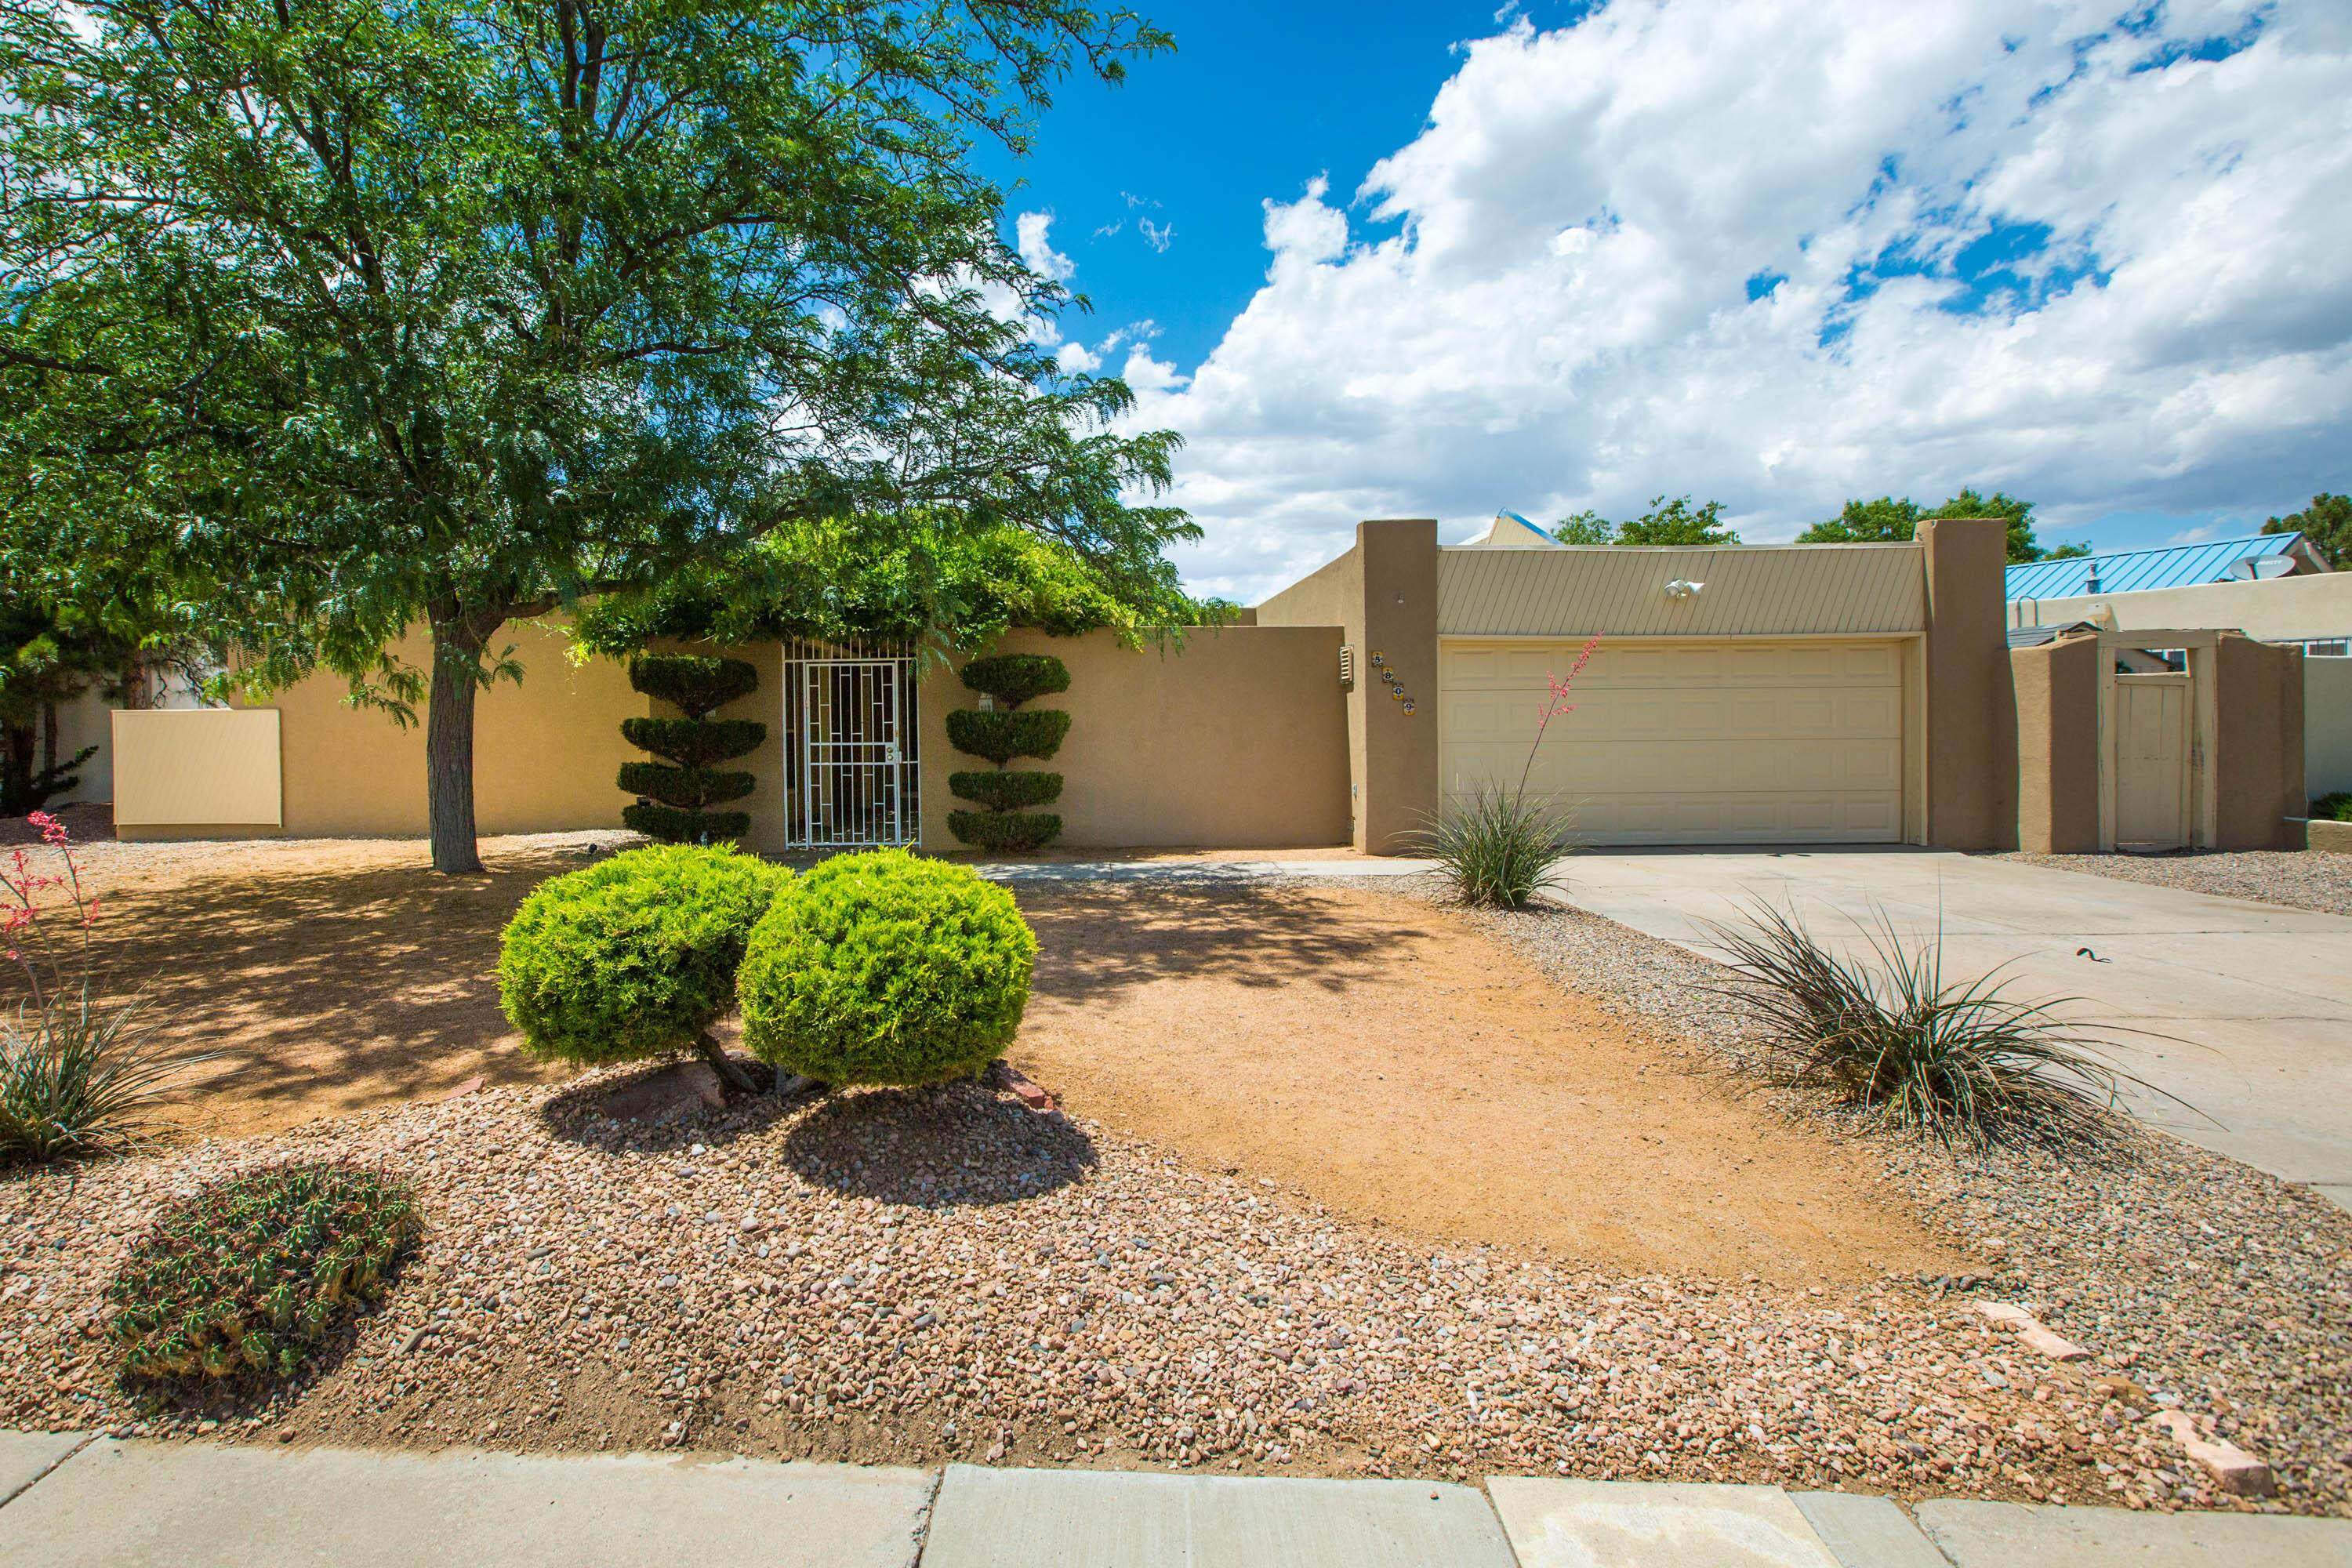 Incredible Find in Bear Canyon Village! Welcome to this Bright, Beautiful, Single-Story, Move-in Ready Mossman Home in Albuquerque's Northeast Heights. *2020 TPO Roof + 2022 Heating/Cooling Combo Unit!* Enter through the gate and 5809 Torreon greets you with a Charming, Wisteria-Covered Courtyard. Updated Kitchen with Granite Counters, Wolf Gas Range, Stainless Appliances, Large Breakfast Nook. Conveniently Located with Easy-Access to Everything.